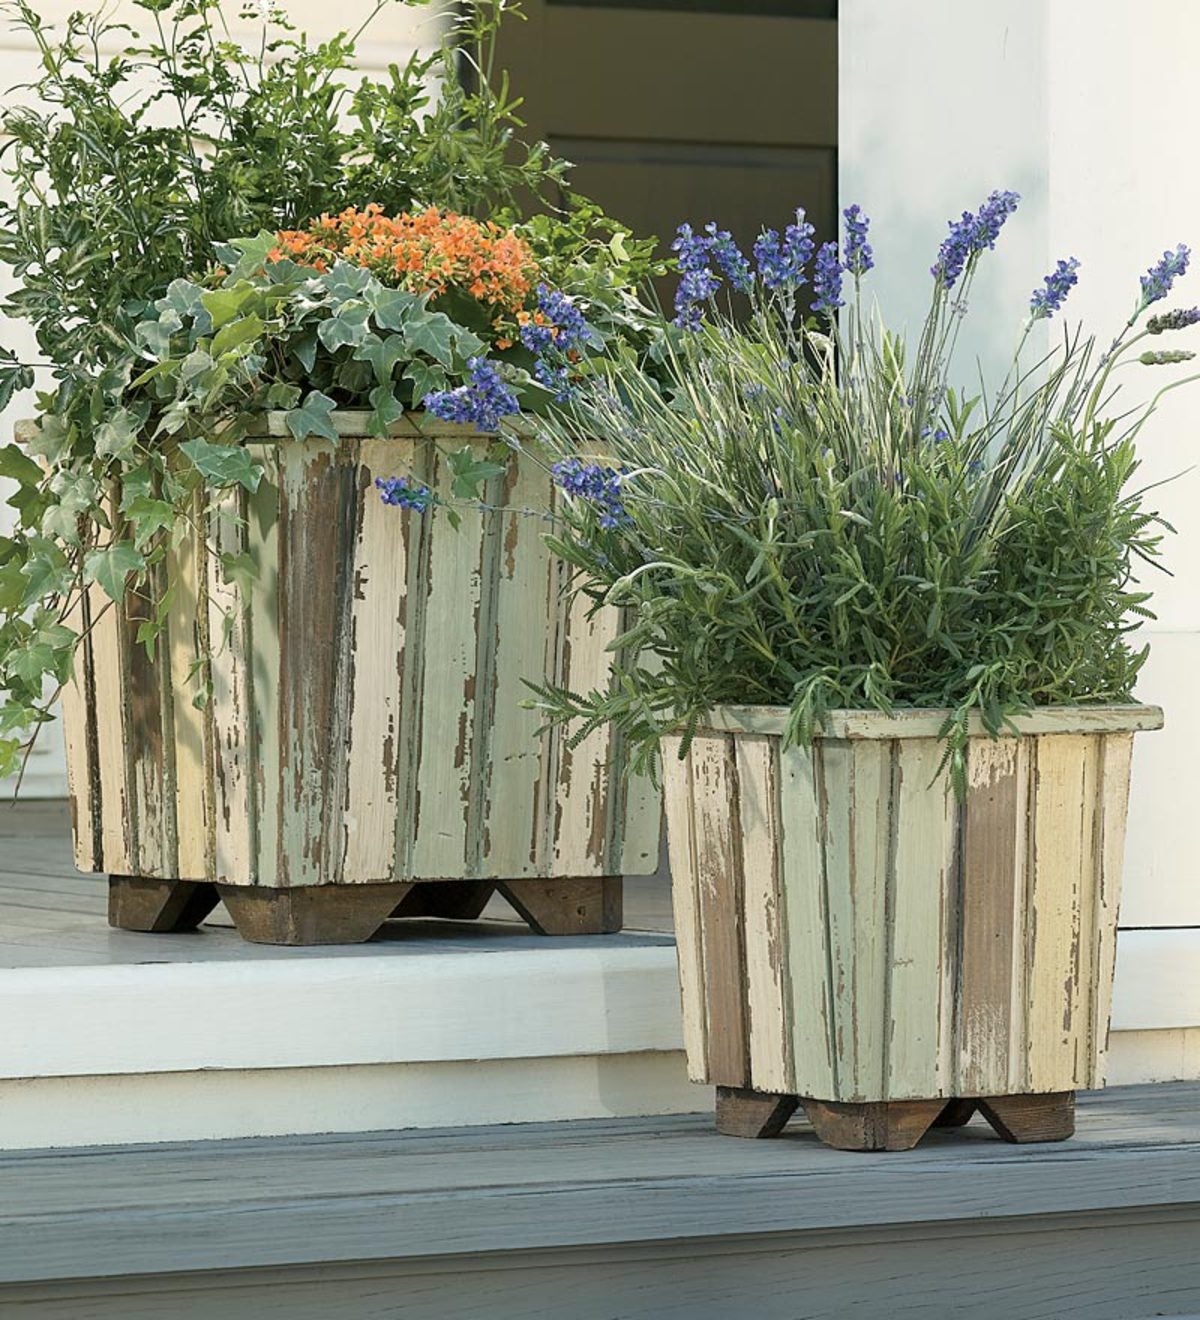 Reclaimed Wood Makes Beautiful Planters